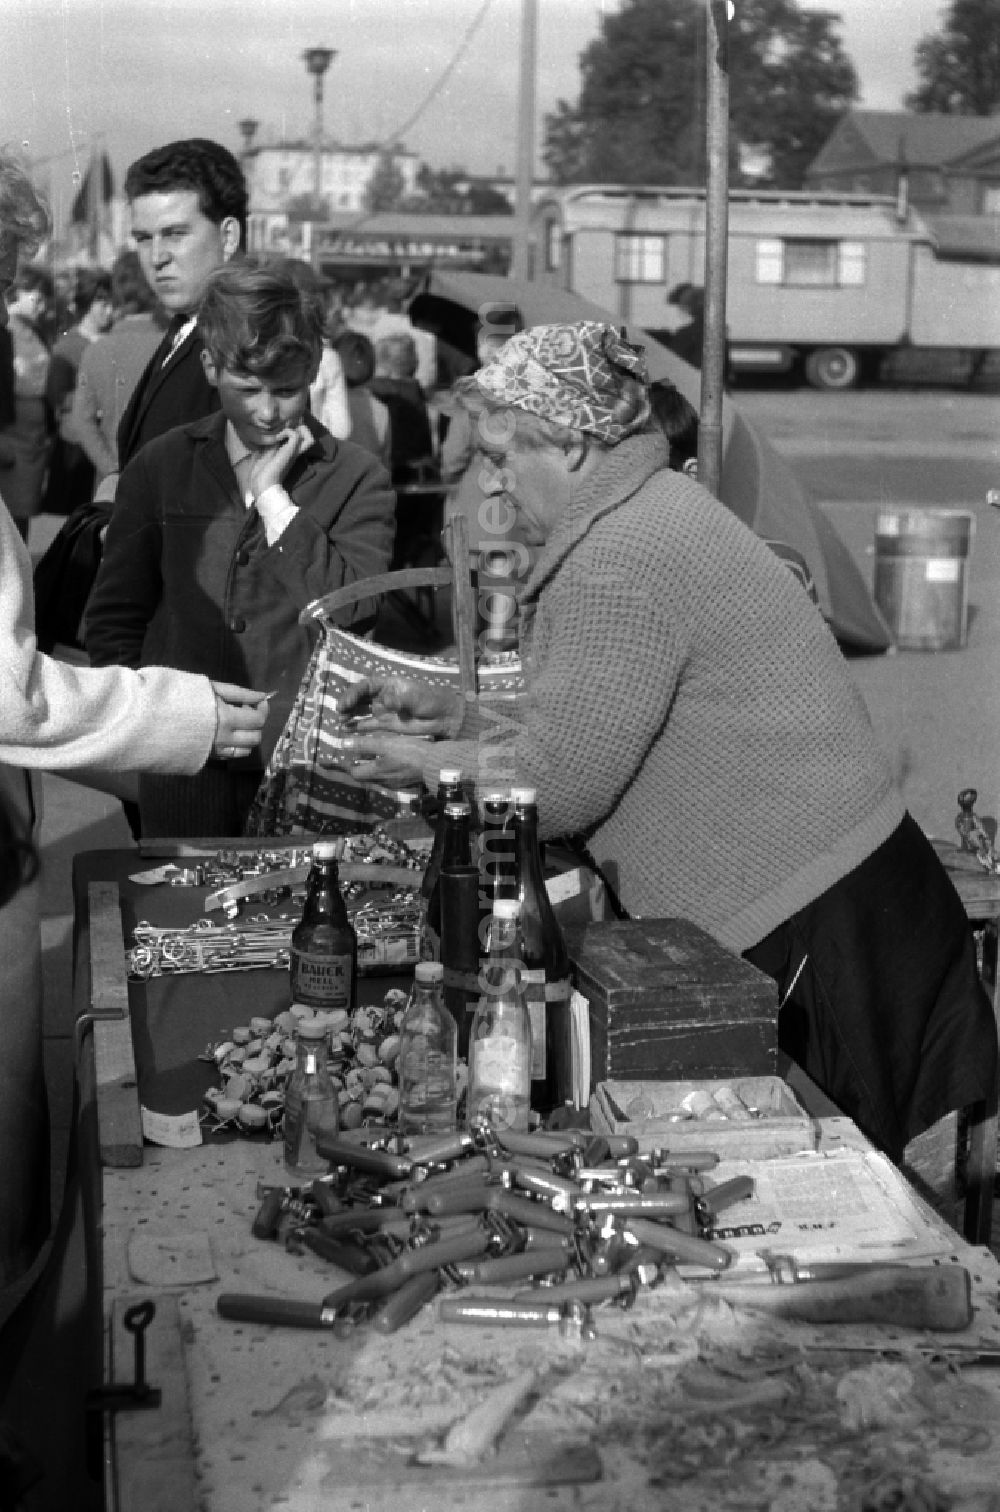 GDR photo archive: Magdeburg - An elderly woman with headscarf sold cork and snap closures at their booth in Magdeburg